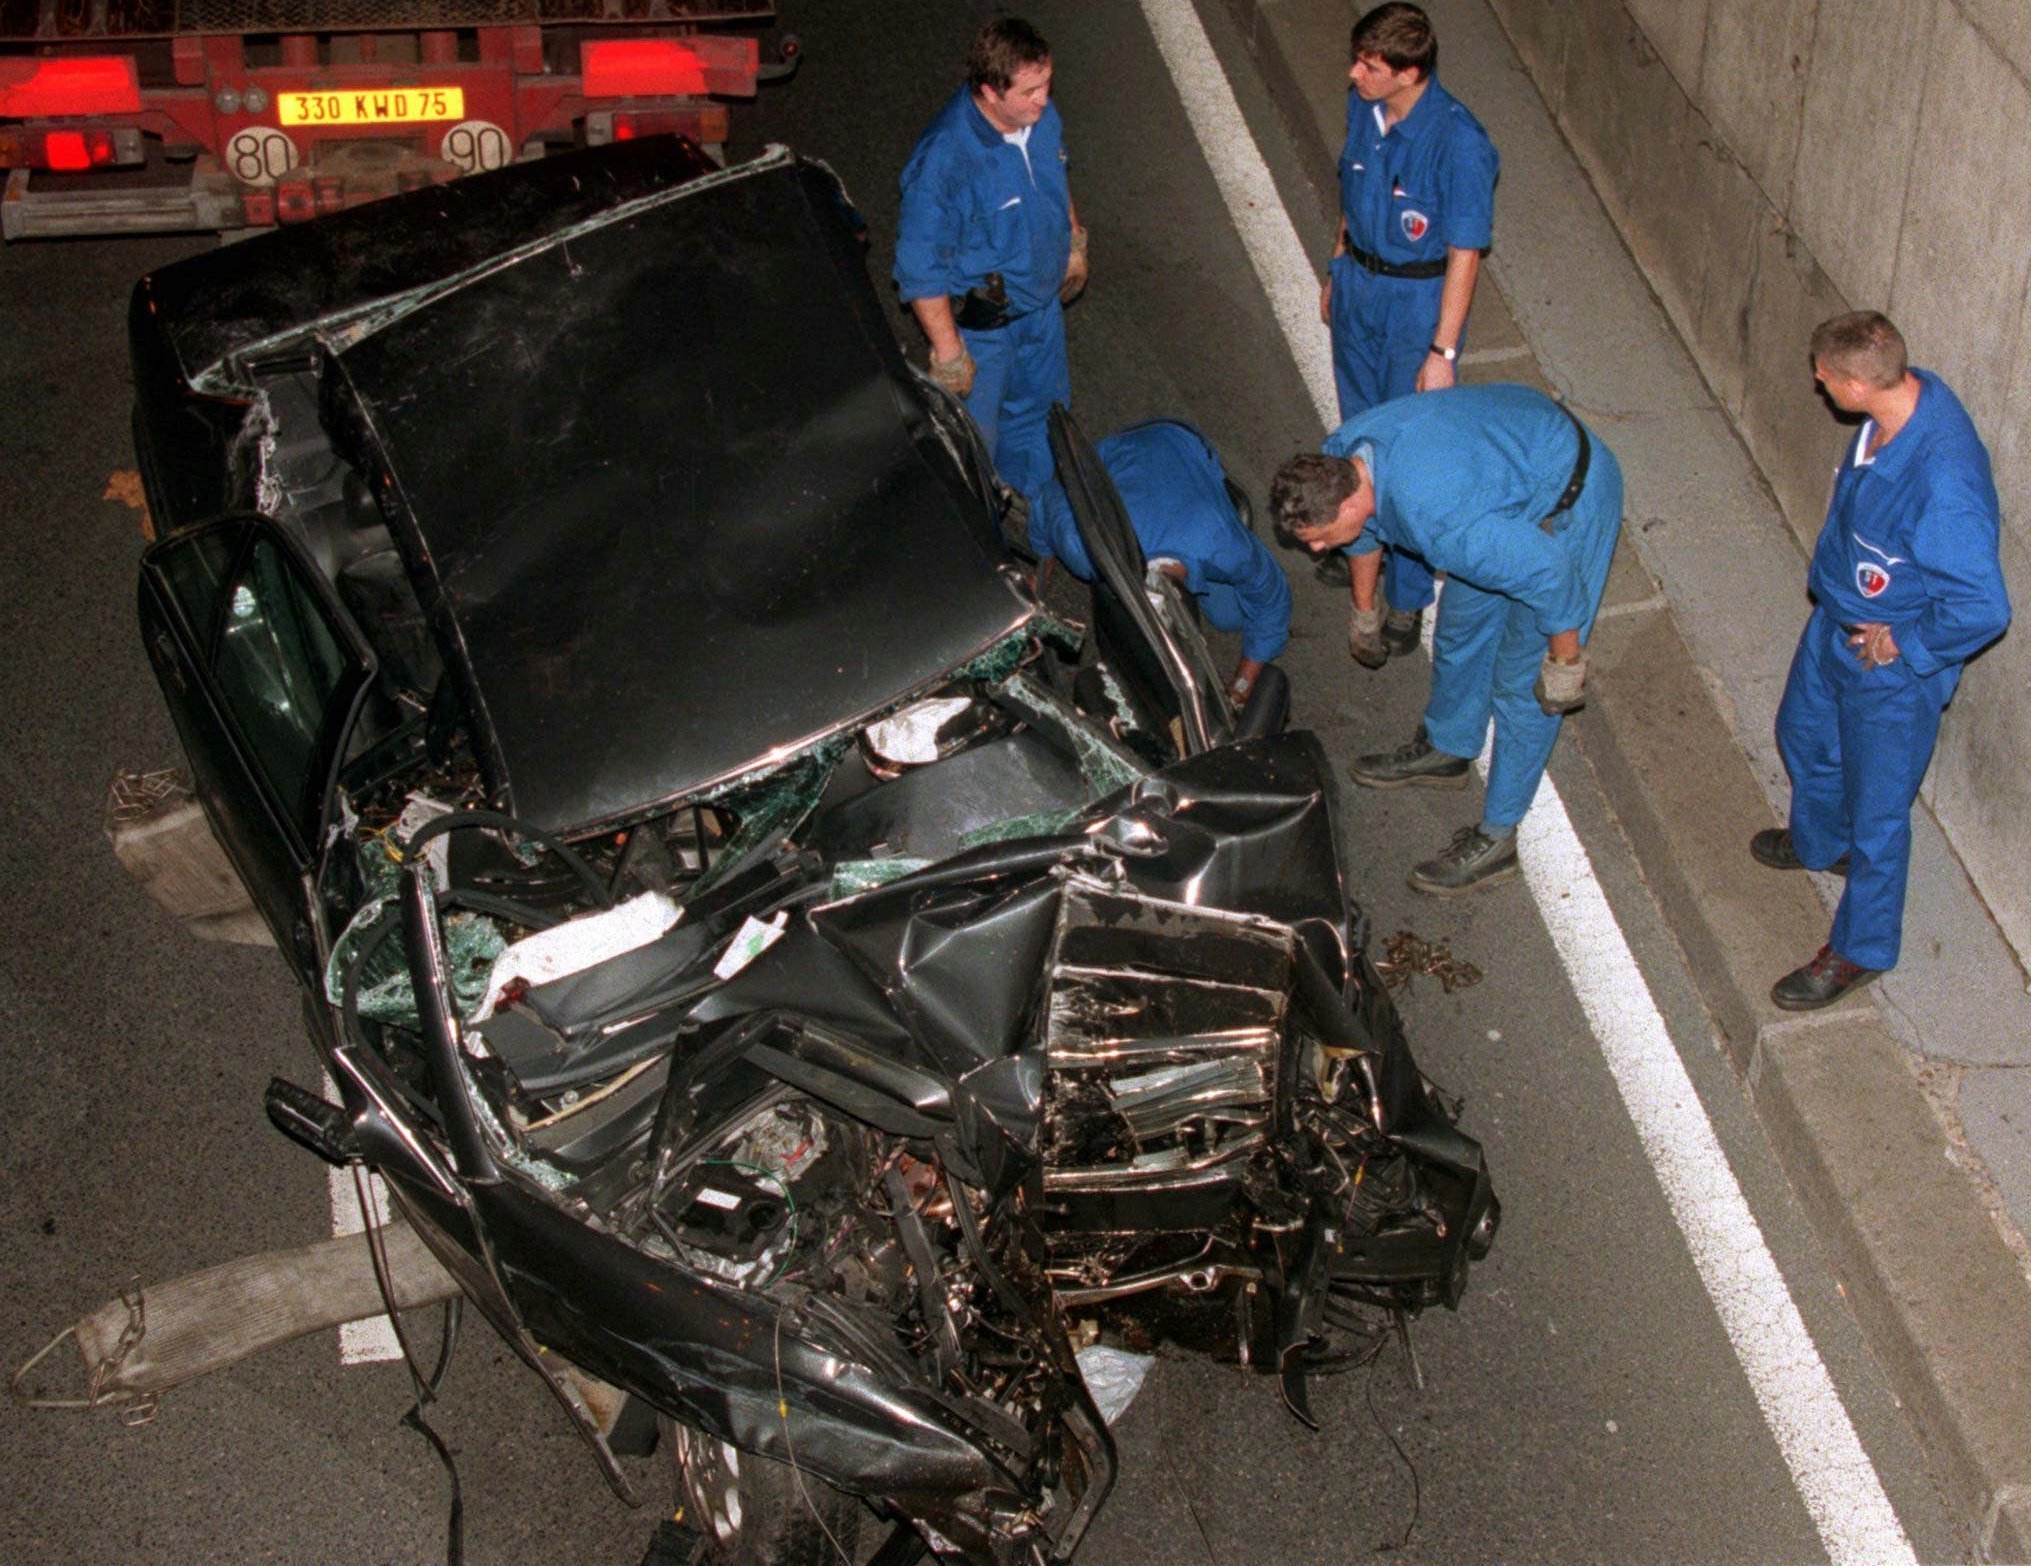 ‘Untold Story’ Behind Princess Diana’s Car Crash – Account of Times Journalists